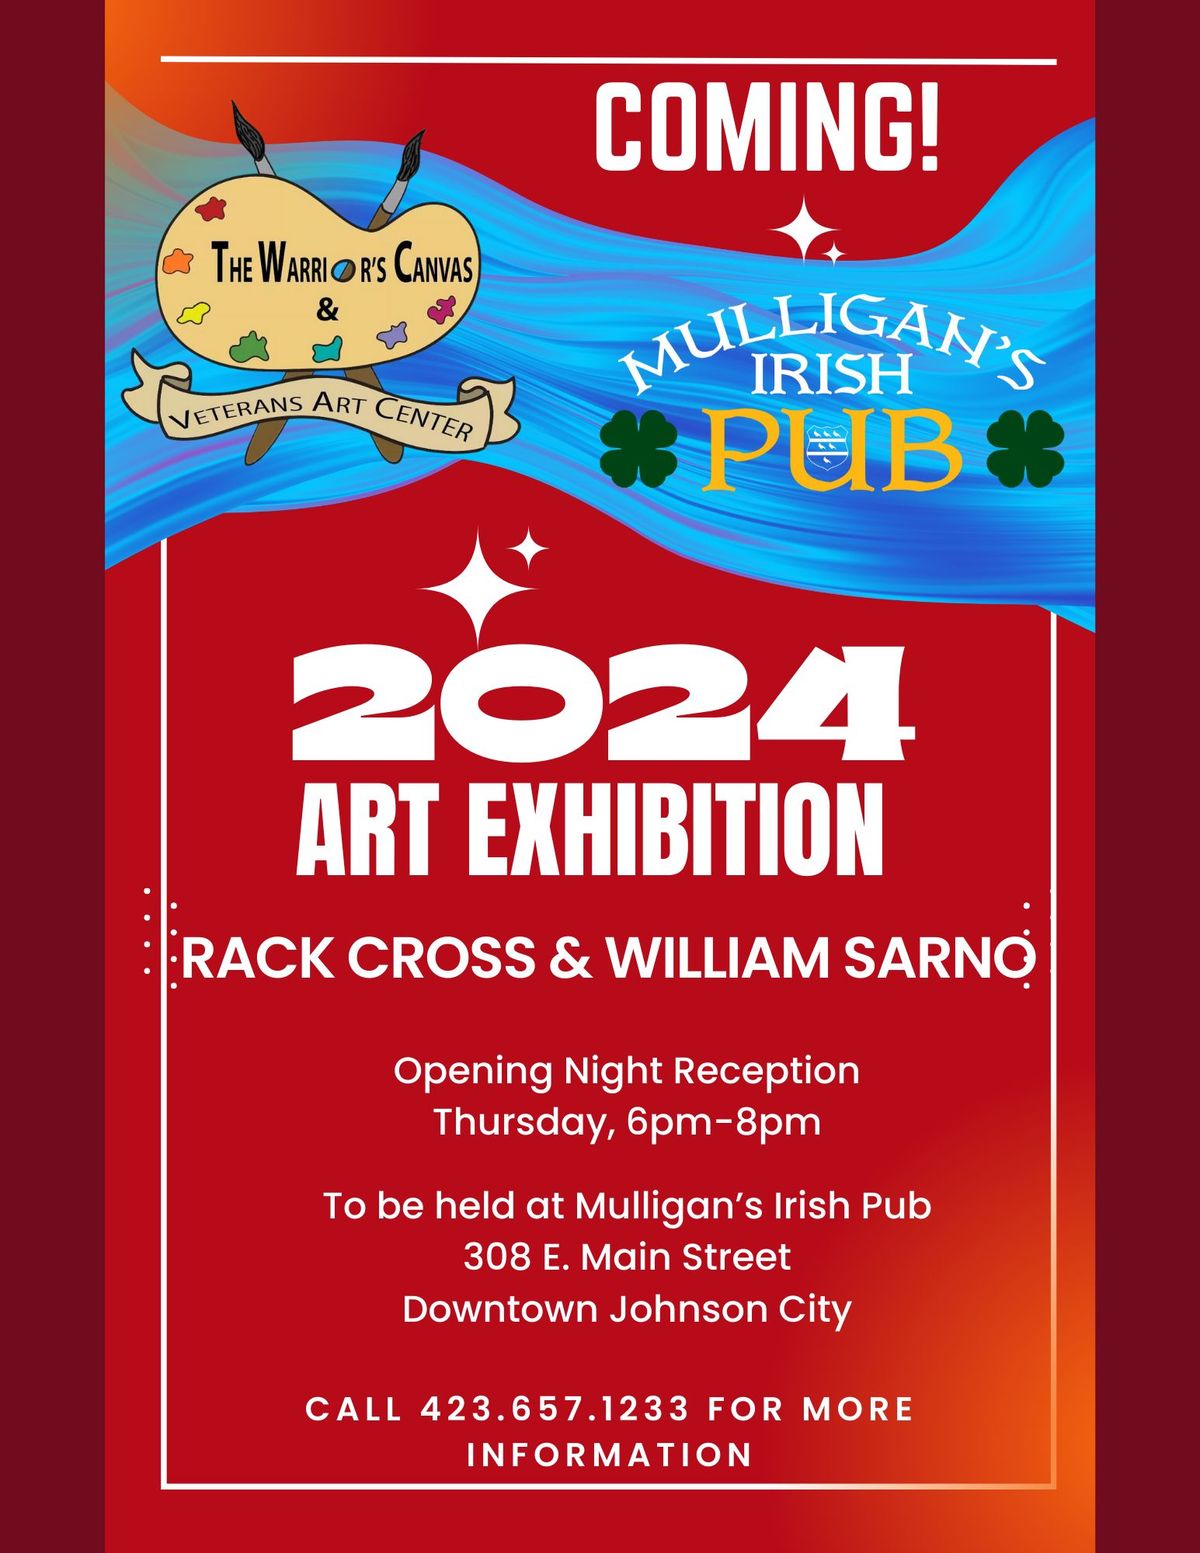 Opening Night! Art Exhibition for Artists and Army Veterans William Sarno & Rack Cross 